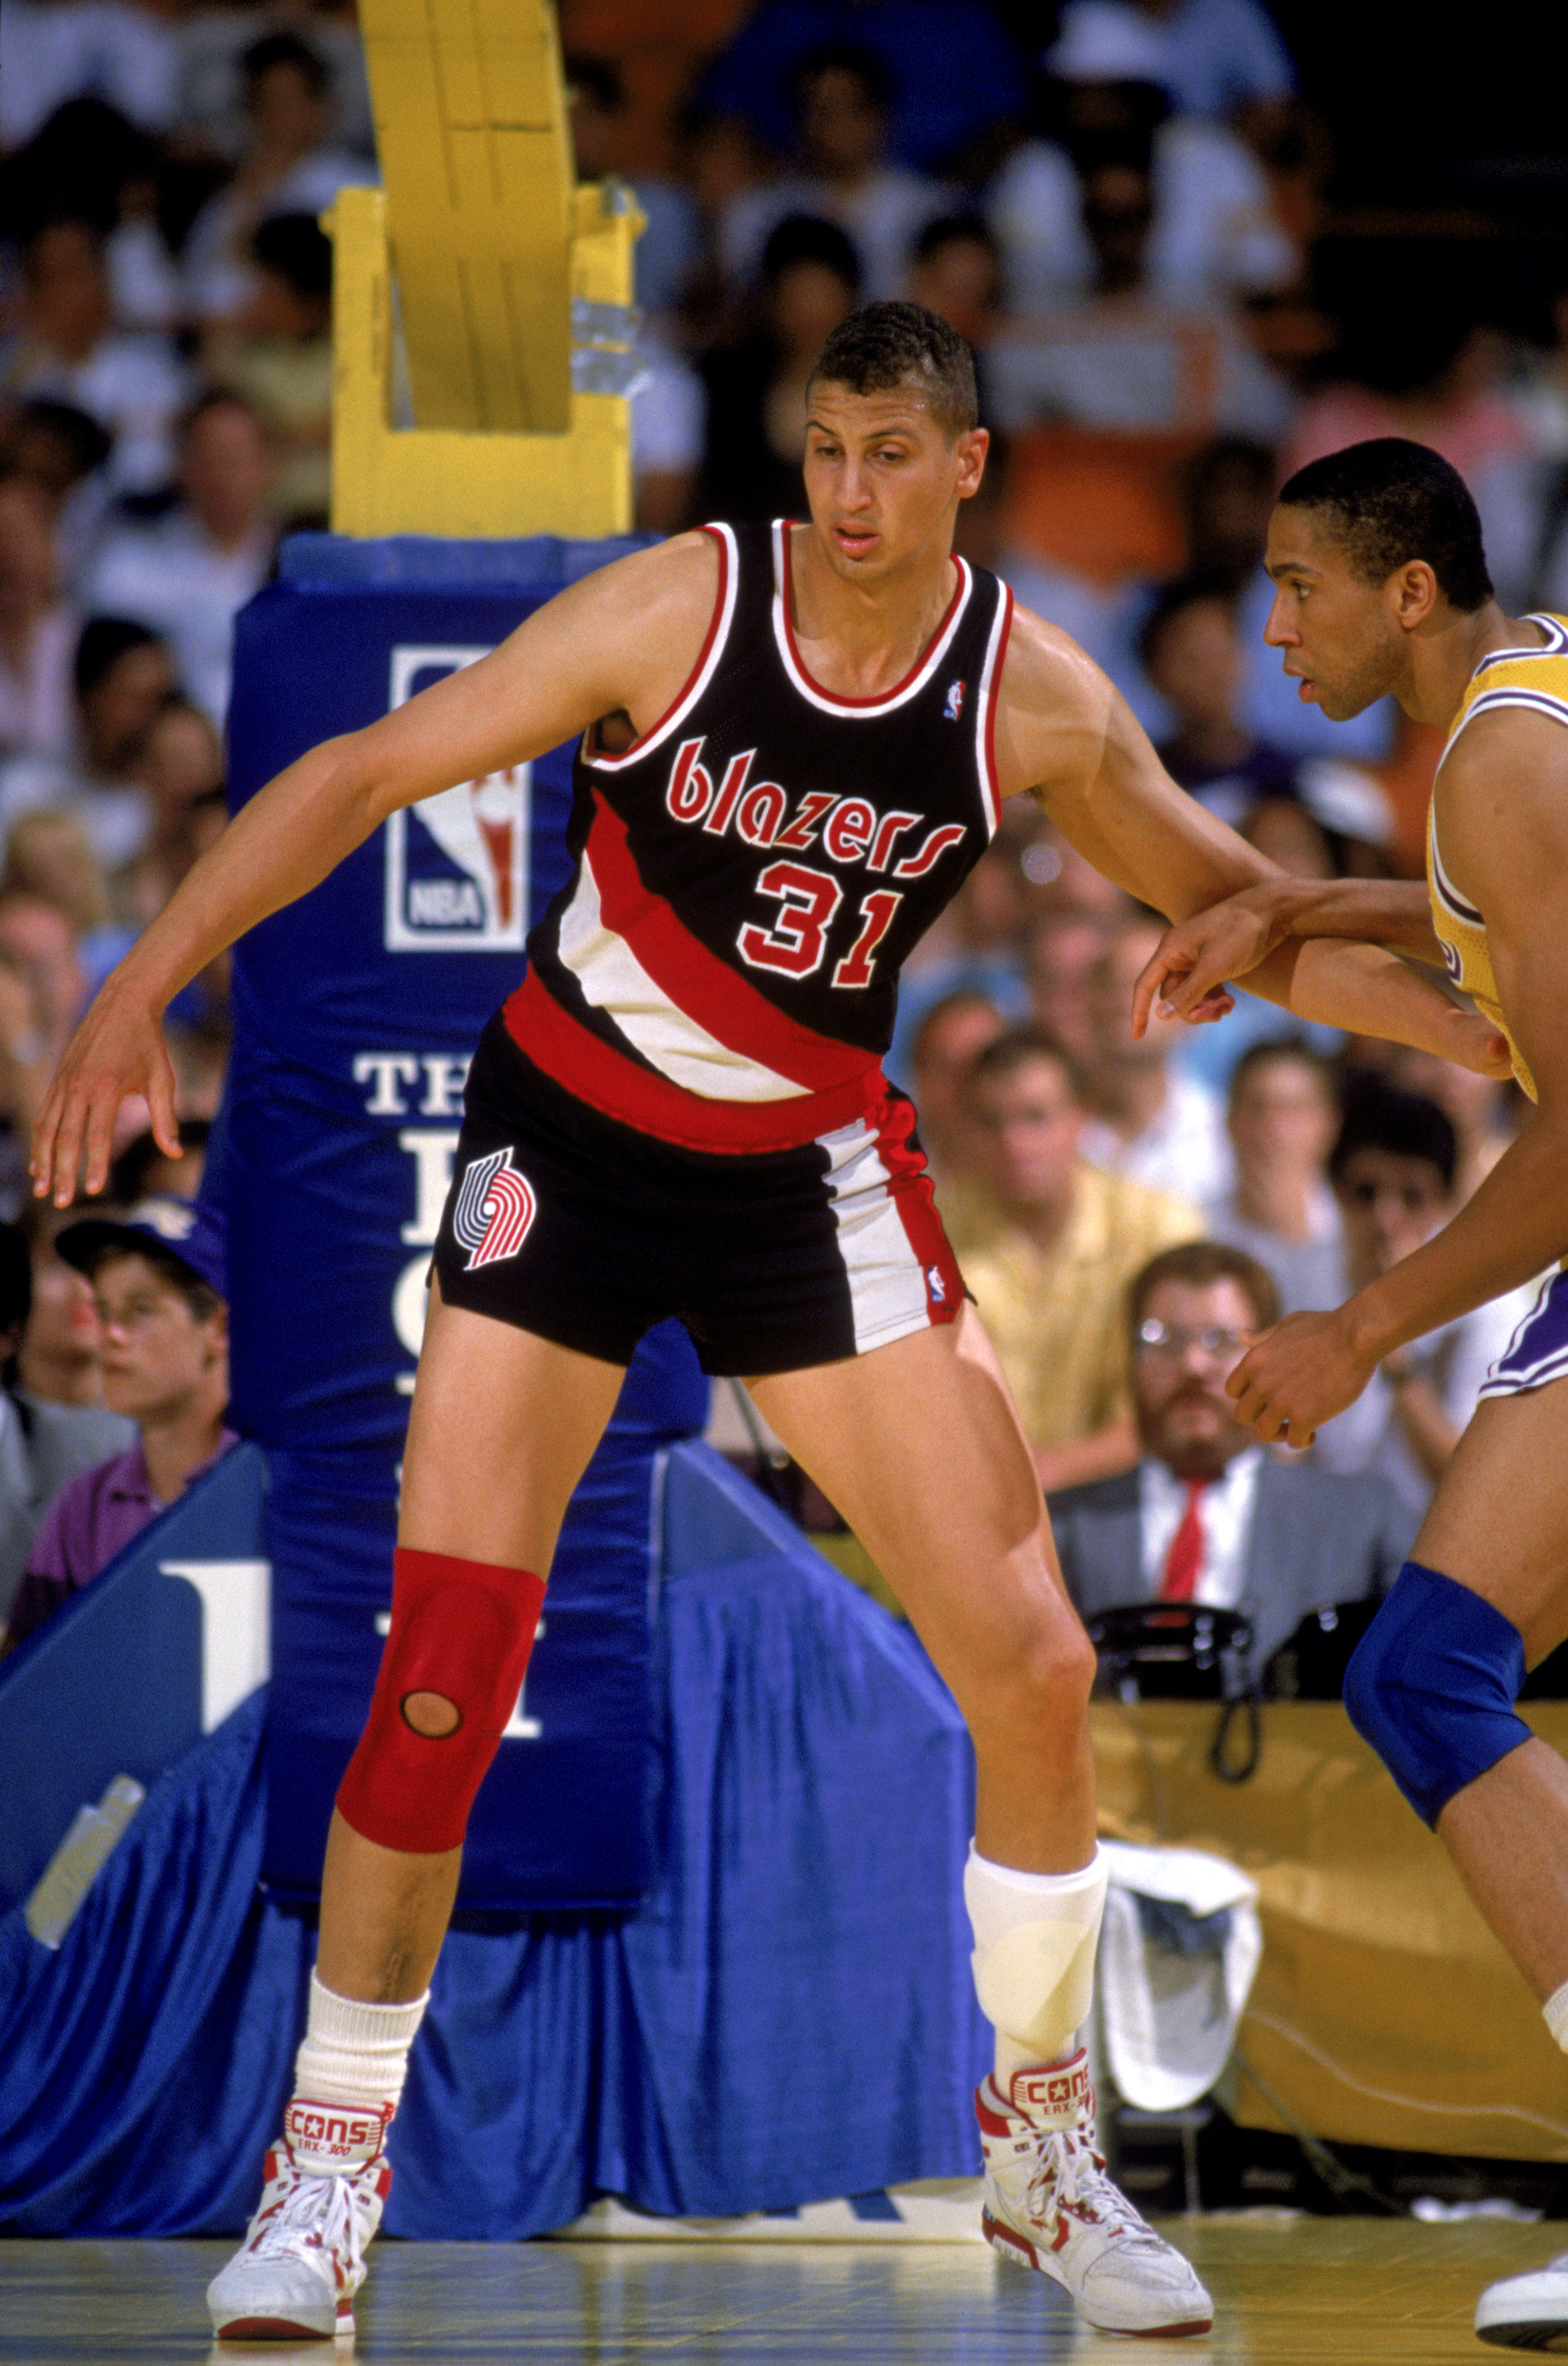 INGLEWOOD, CA - 1989:  Sam Bowie #31 of the Portland Trail Blazers battles for position during a game in the 1988-89 NBA season against the Los Angeles Lakers at the Great Western Forum in Inglewood, California.  (Photo by Stephen Dunn/Getty Images)